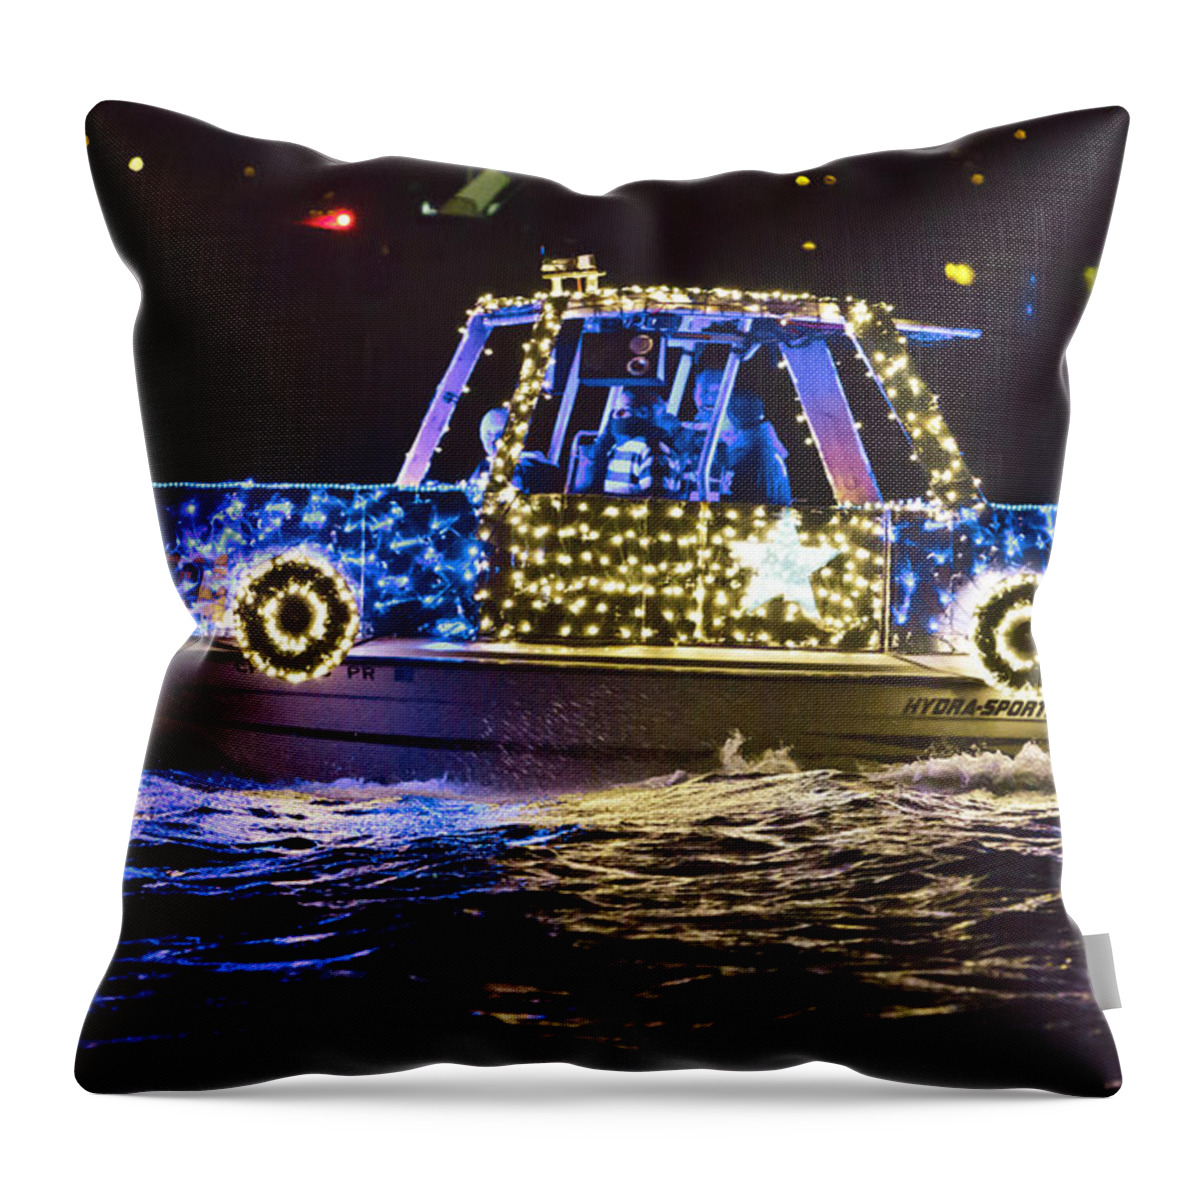 Lighted Yacht Parade Throw Pillow featuring the photograph Lighted Yacht Parade - 2835 by Her Arts Desire